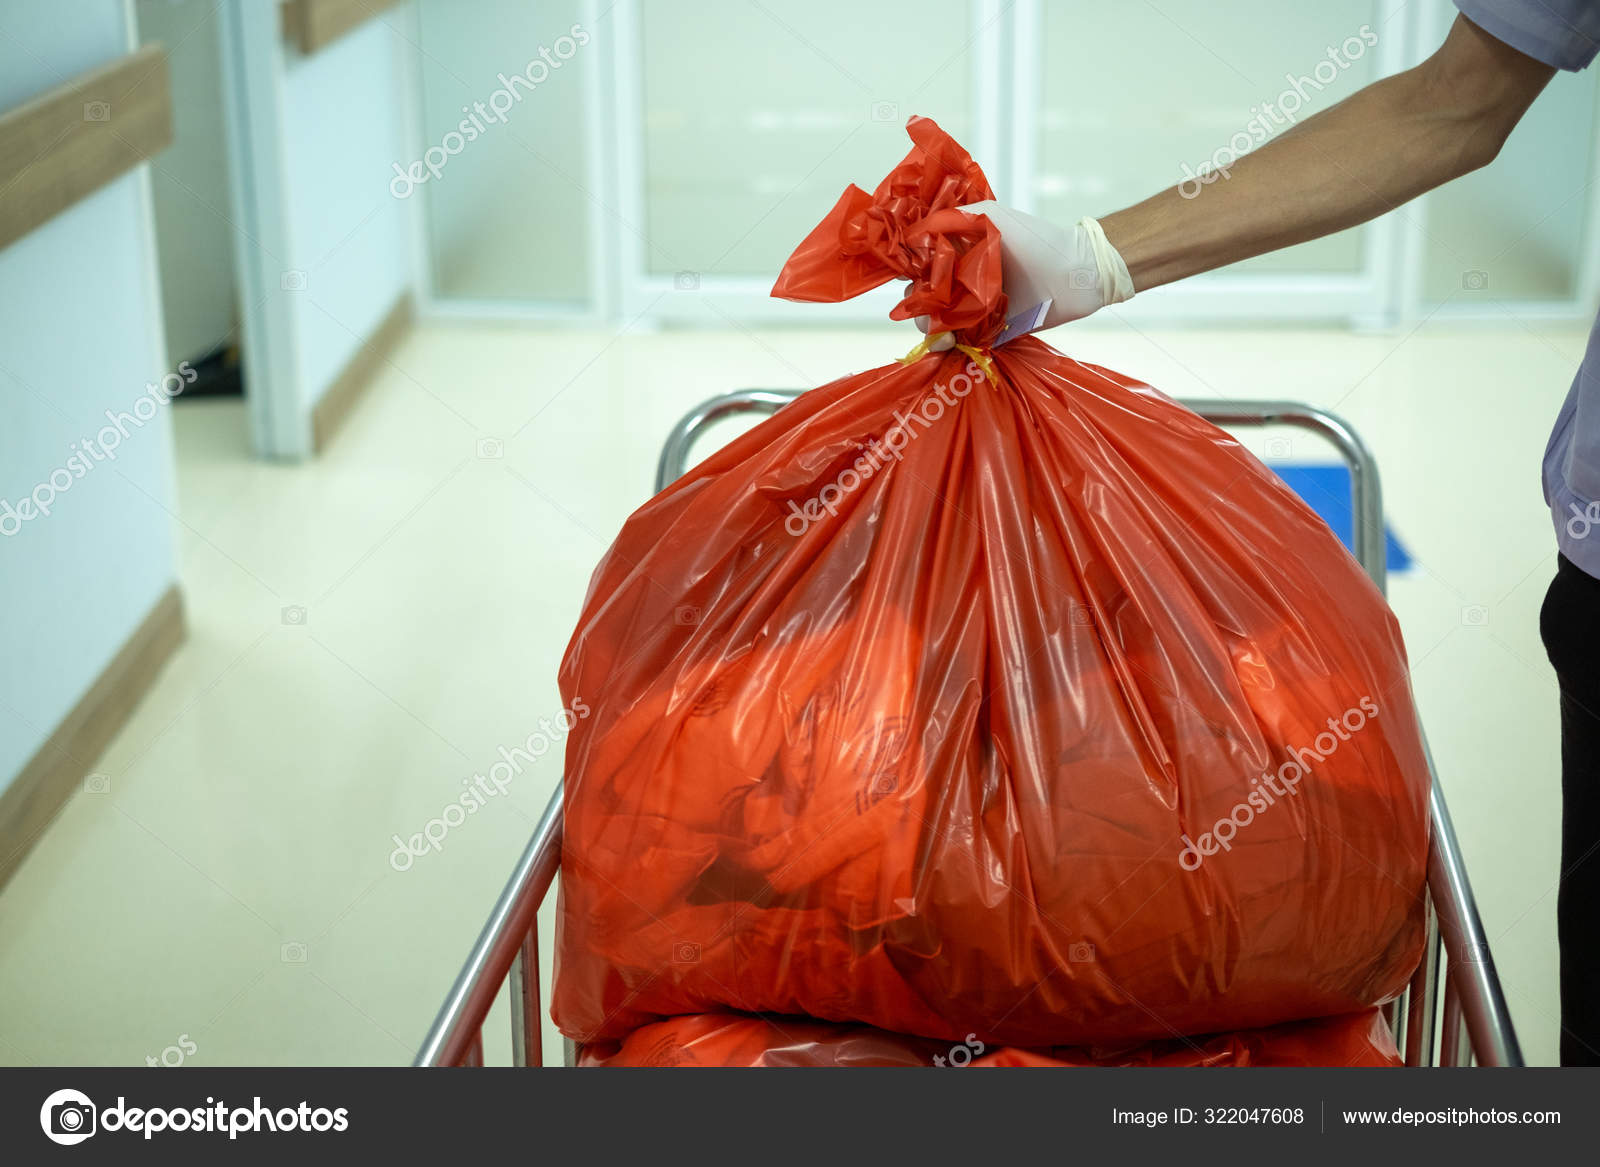 Infectious Waste Must Disposed Trash Bag Red Hospitals Biohazard